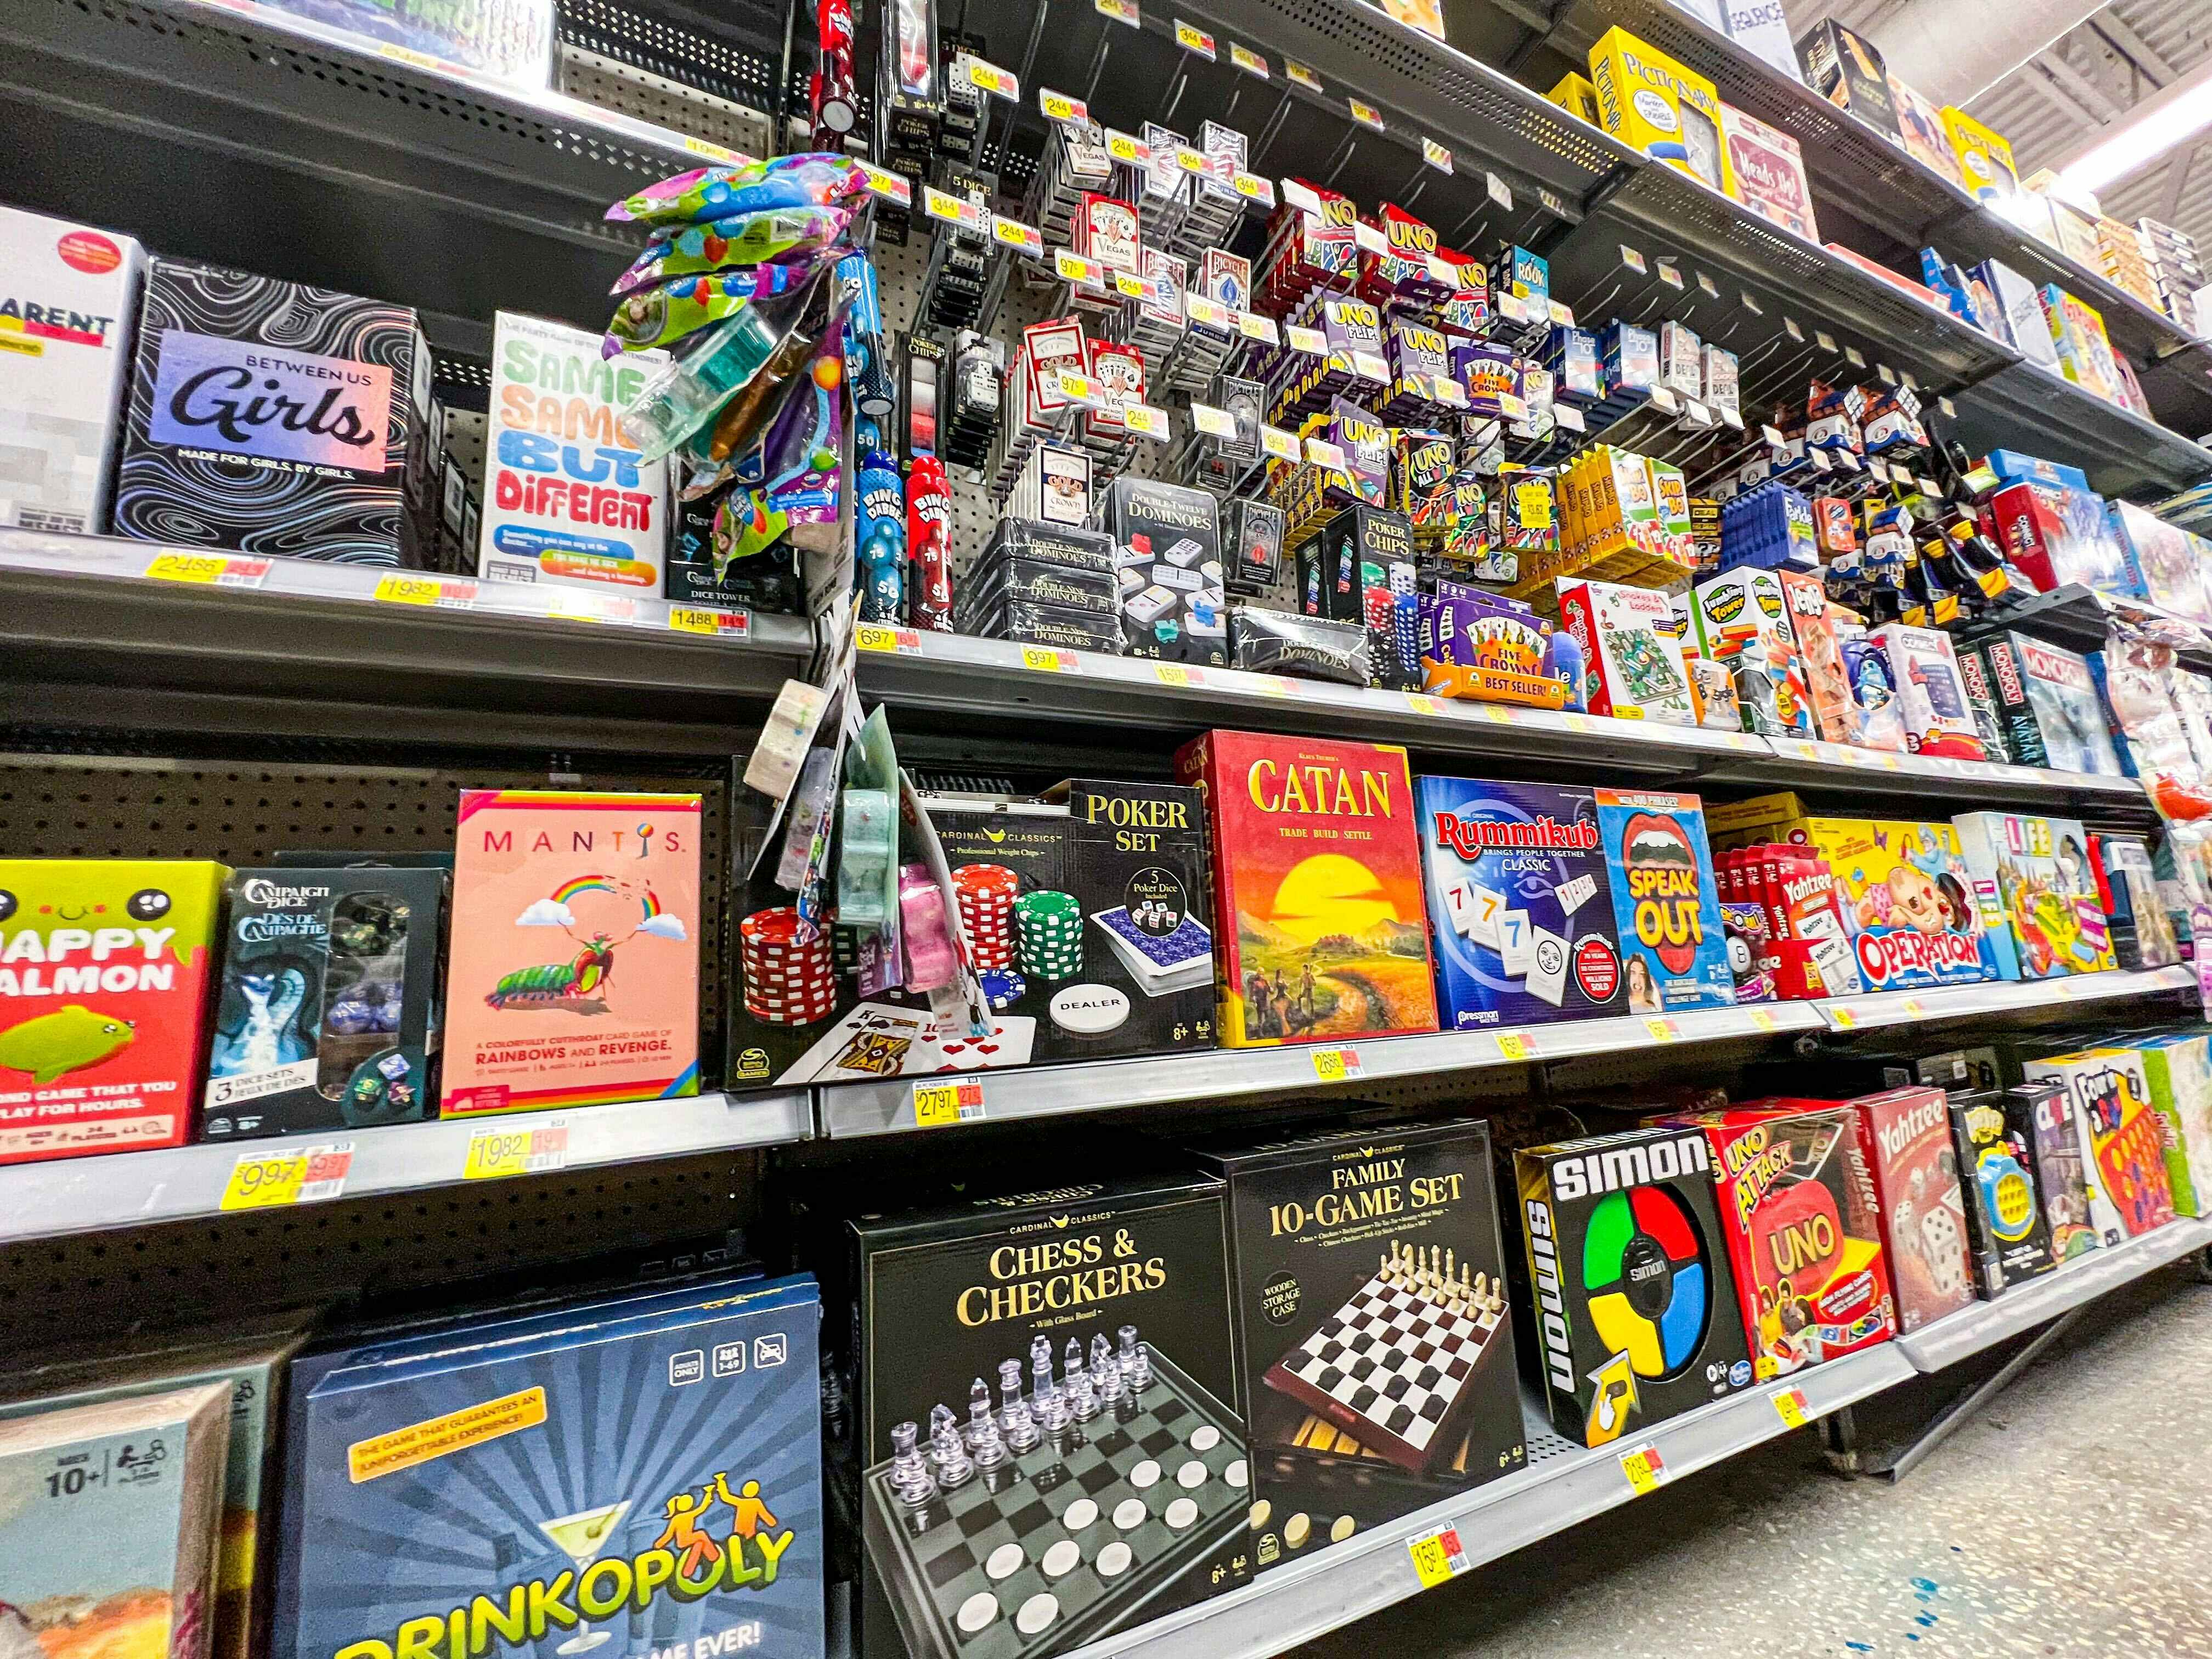 Clearance Board Games at Walmart: $3 Uno, $5 Monopoly, and More